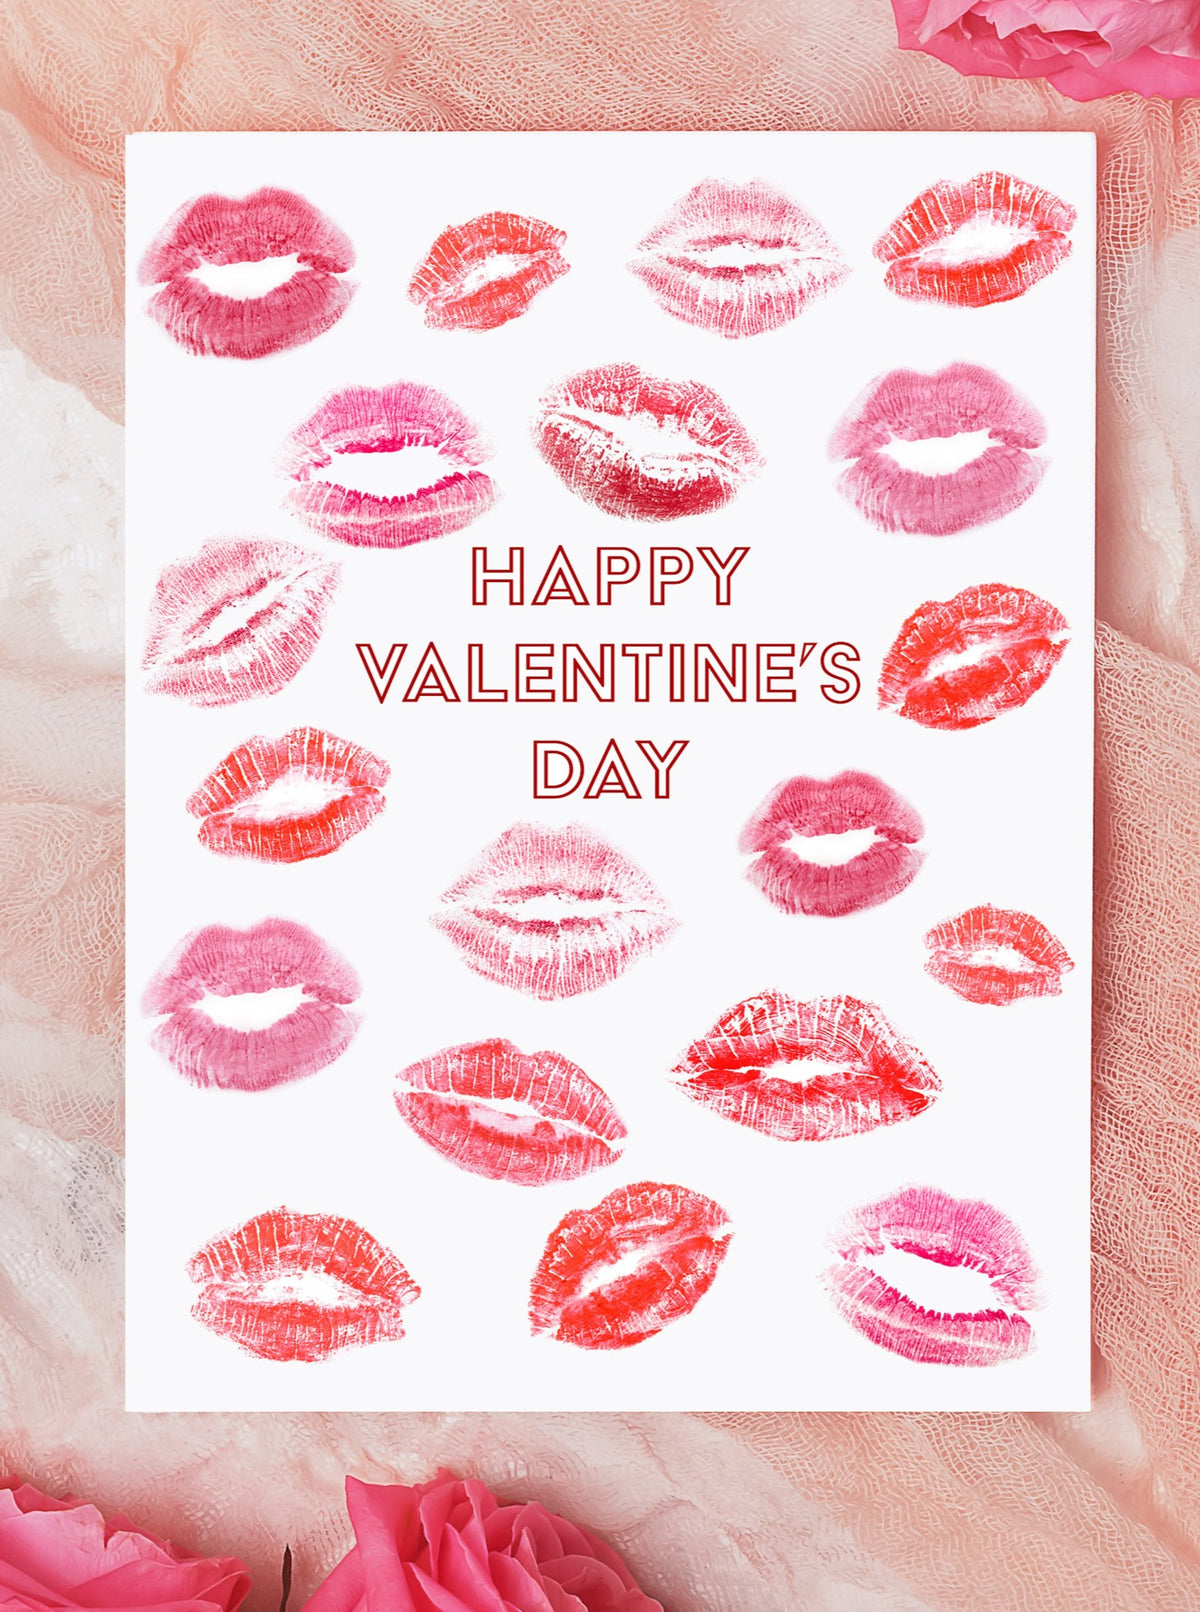 Happy Valentine's Day Kisses Card Set,Galentines Day Card for friend,Happy Valentine's Day Lipstick Card Set,VDay Card for Her,Made in USA